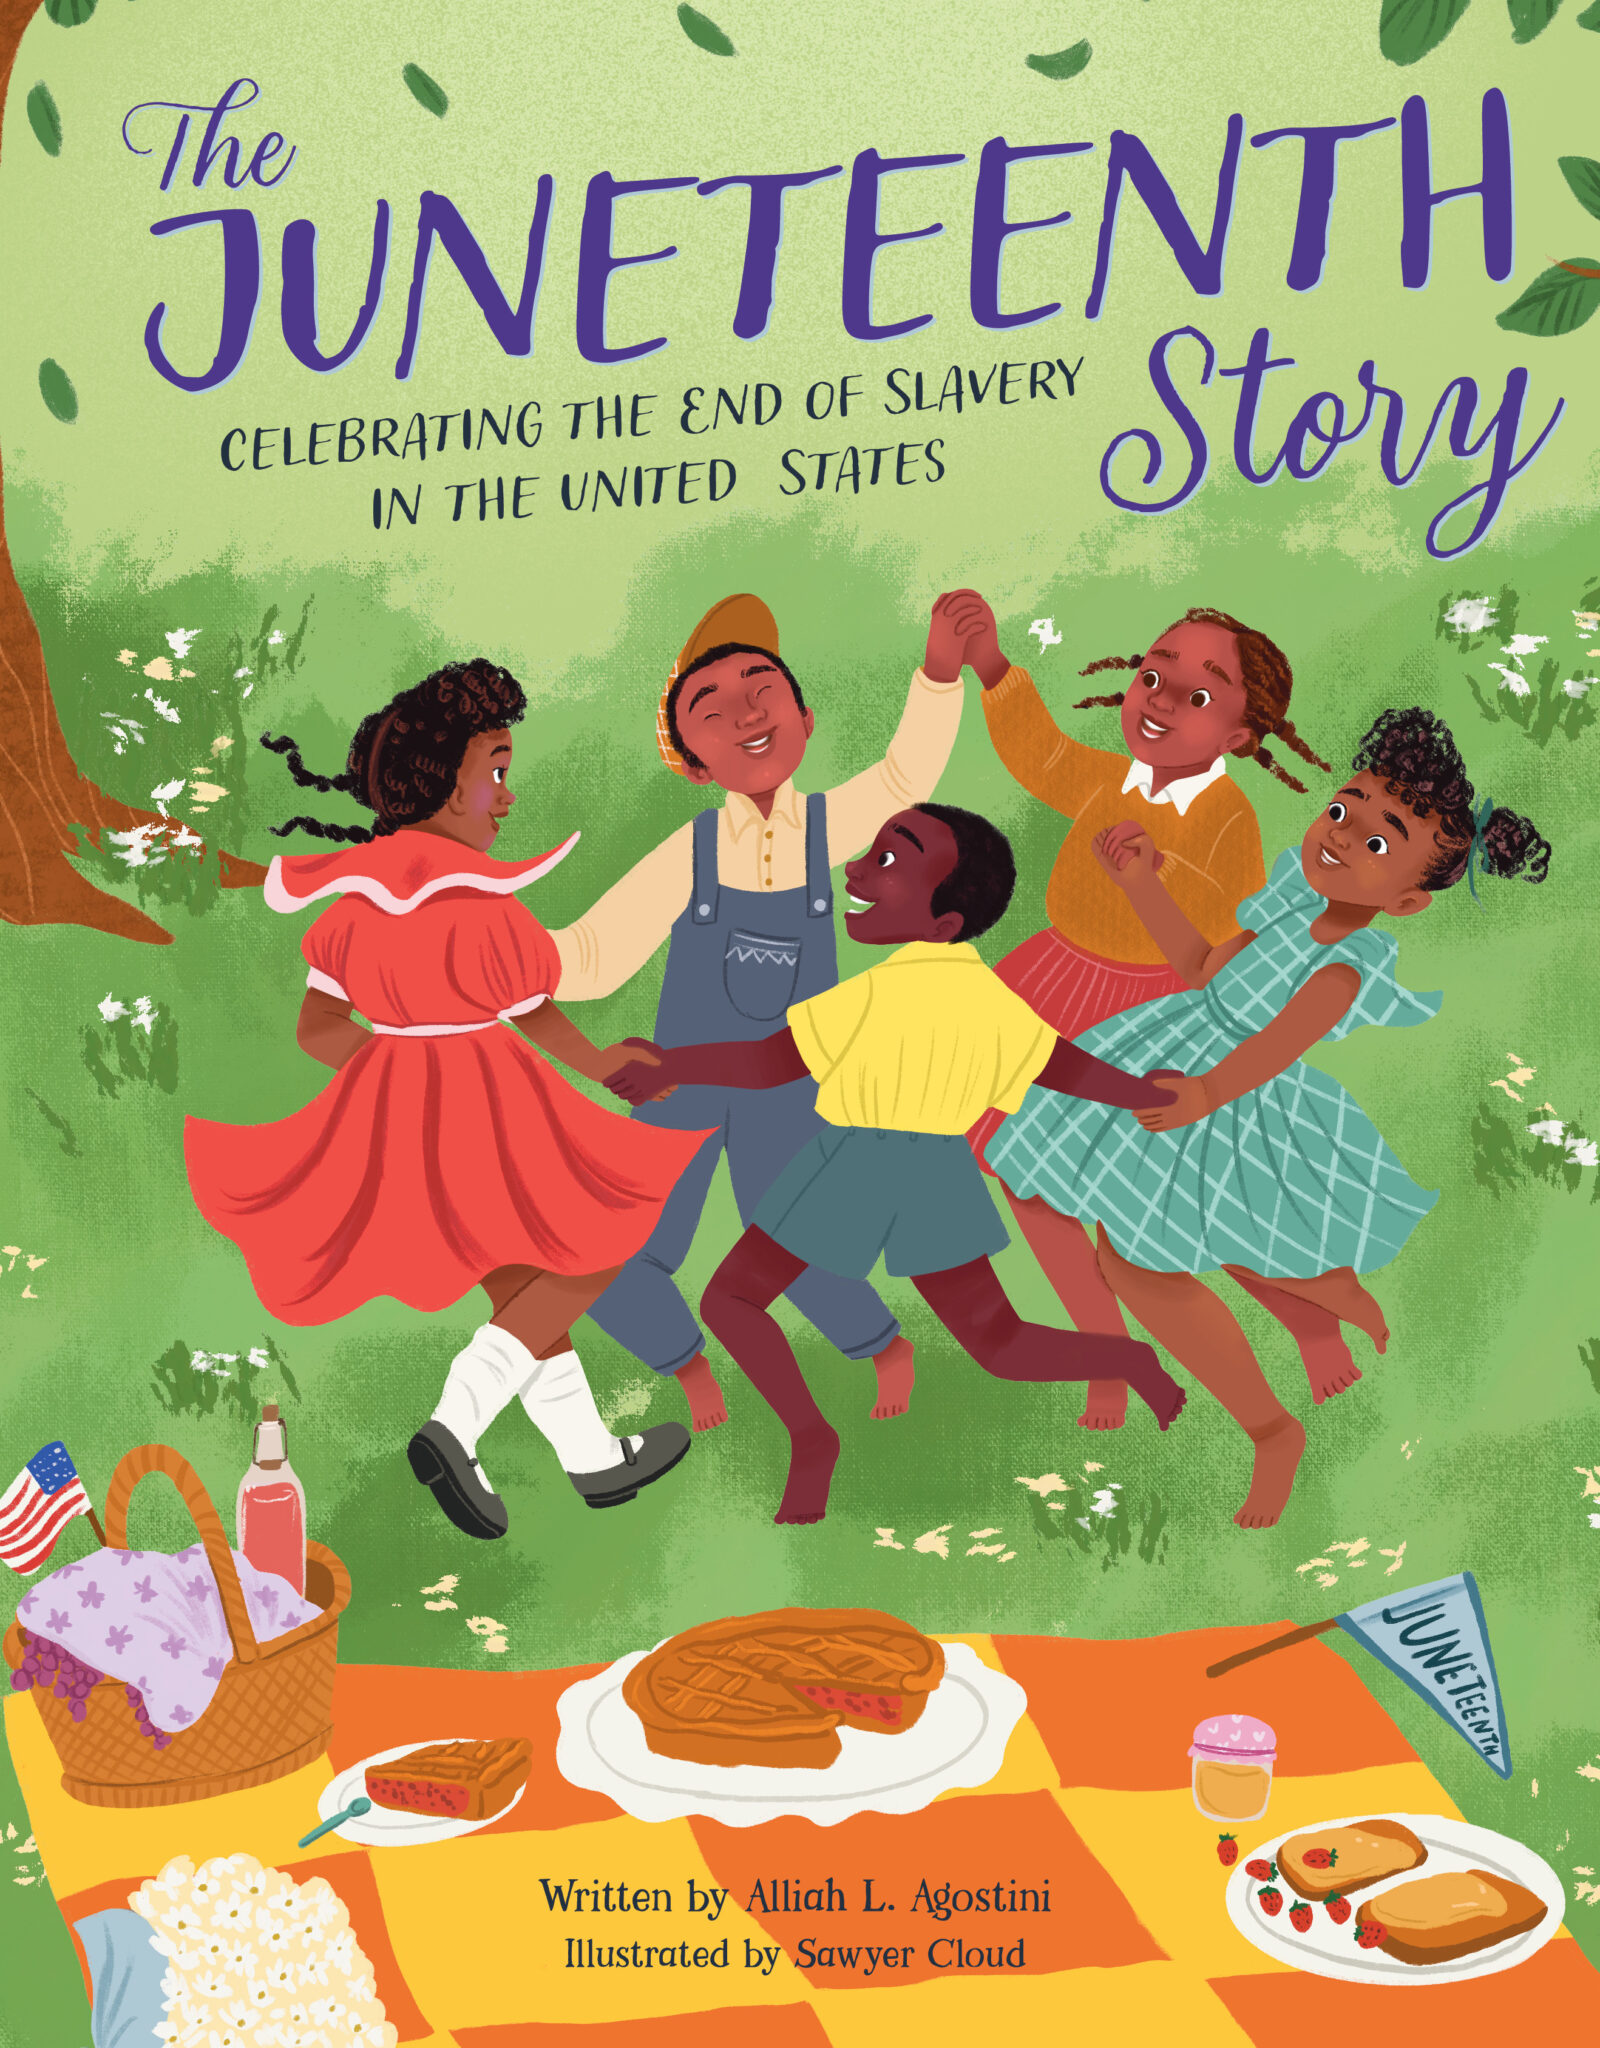 New children’s book celebrates the official end of slavery